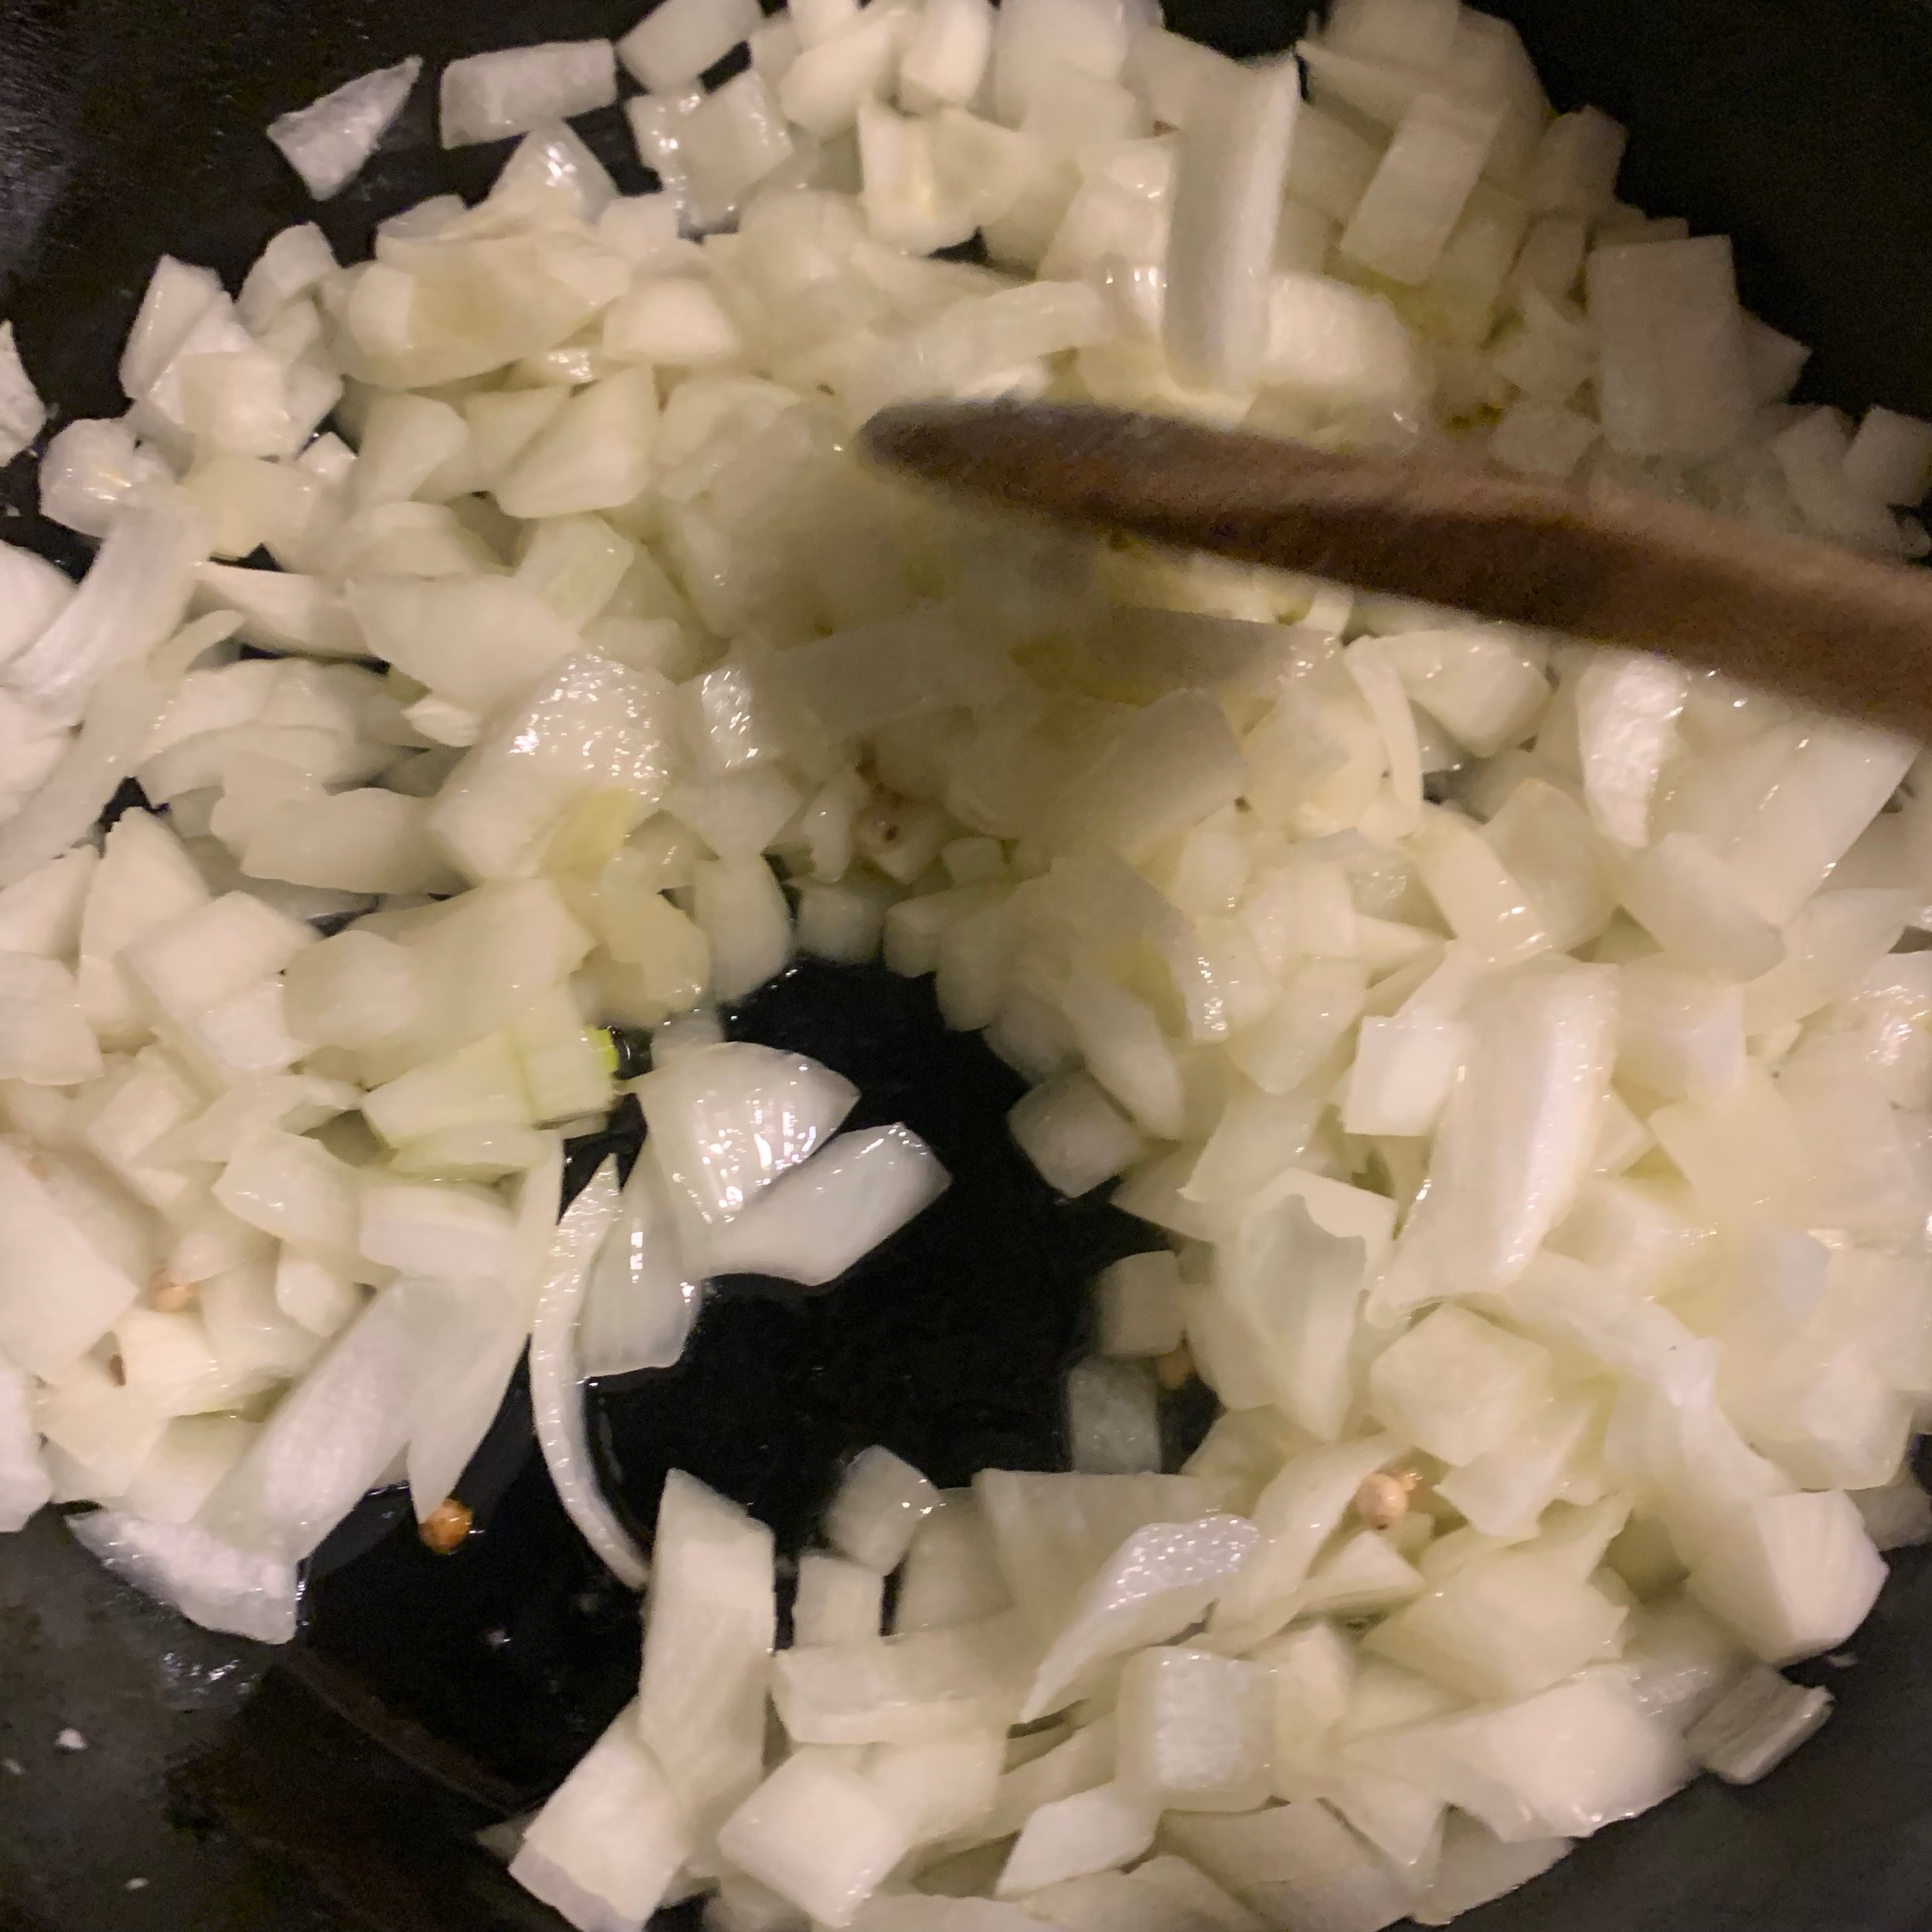 sauté your onions to release their bitterness